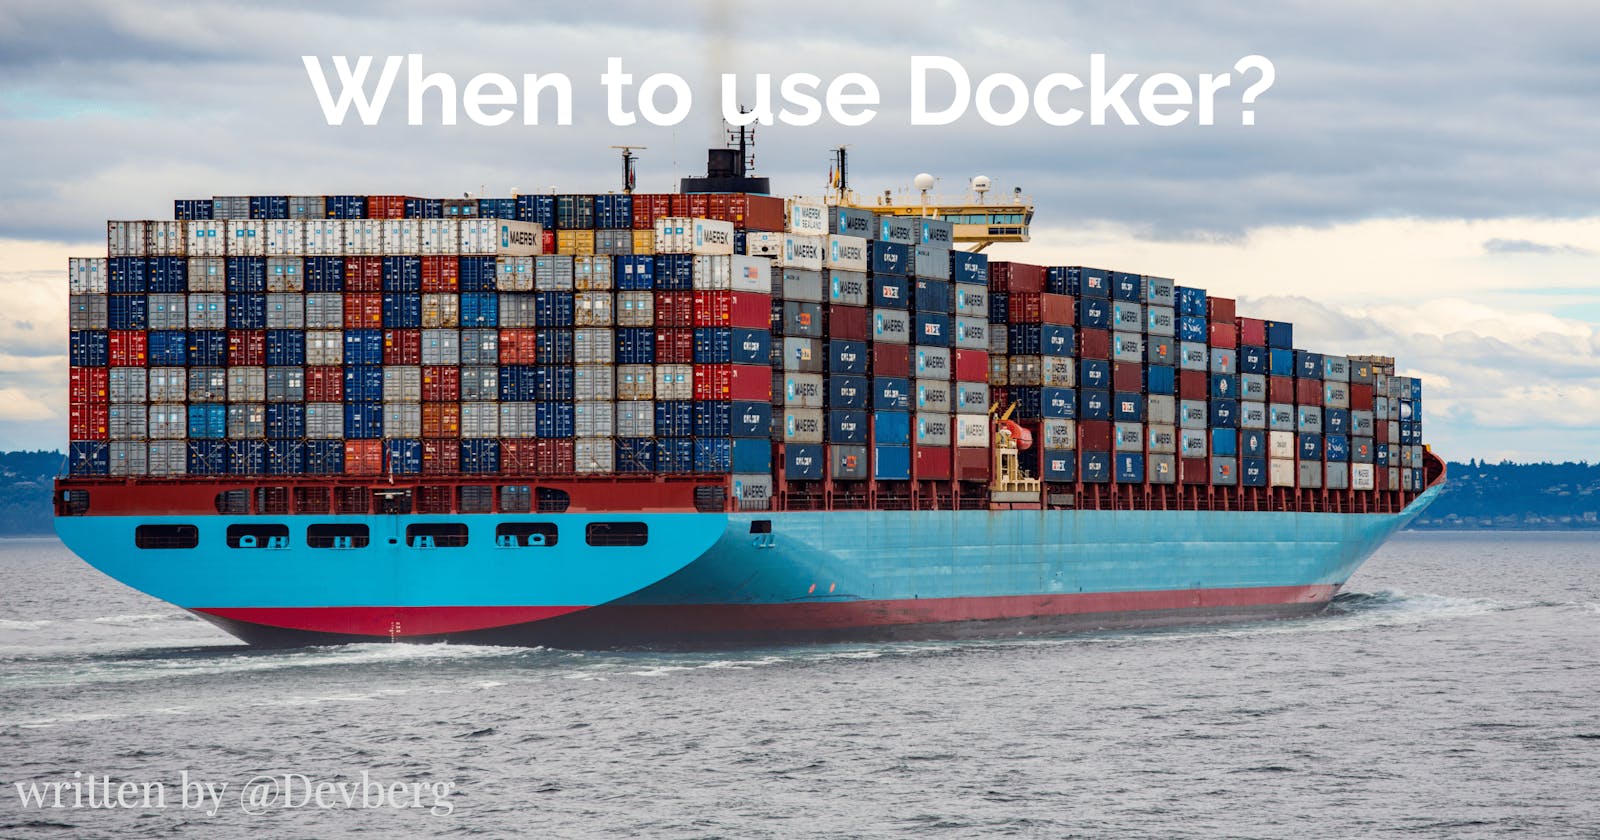 When to use Docker?